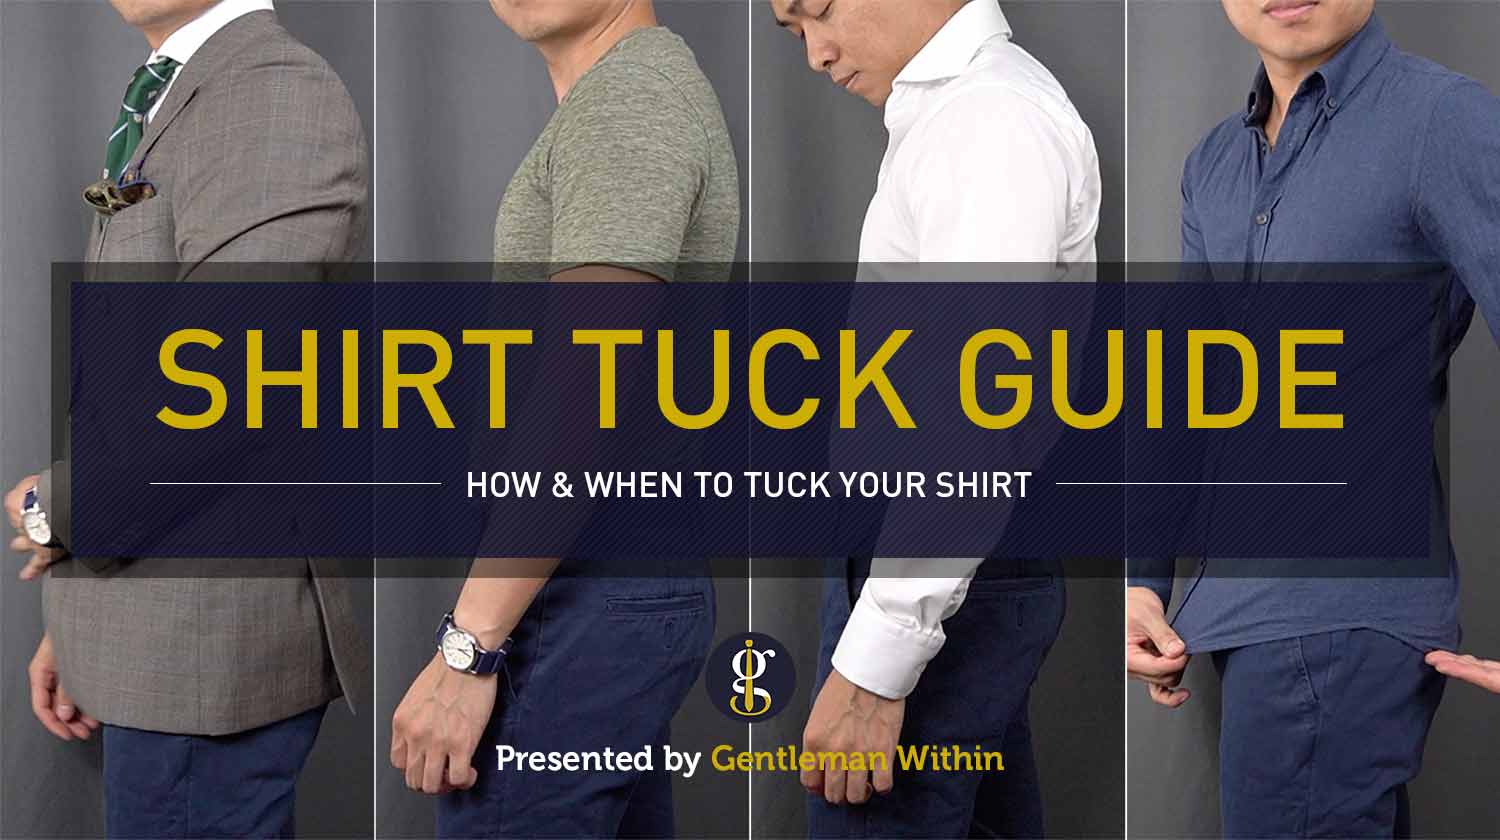 Shirt Tuck Guide: How to Tuck Your Shirt | GENTLEMAN WITHIN